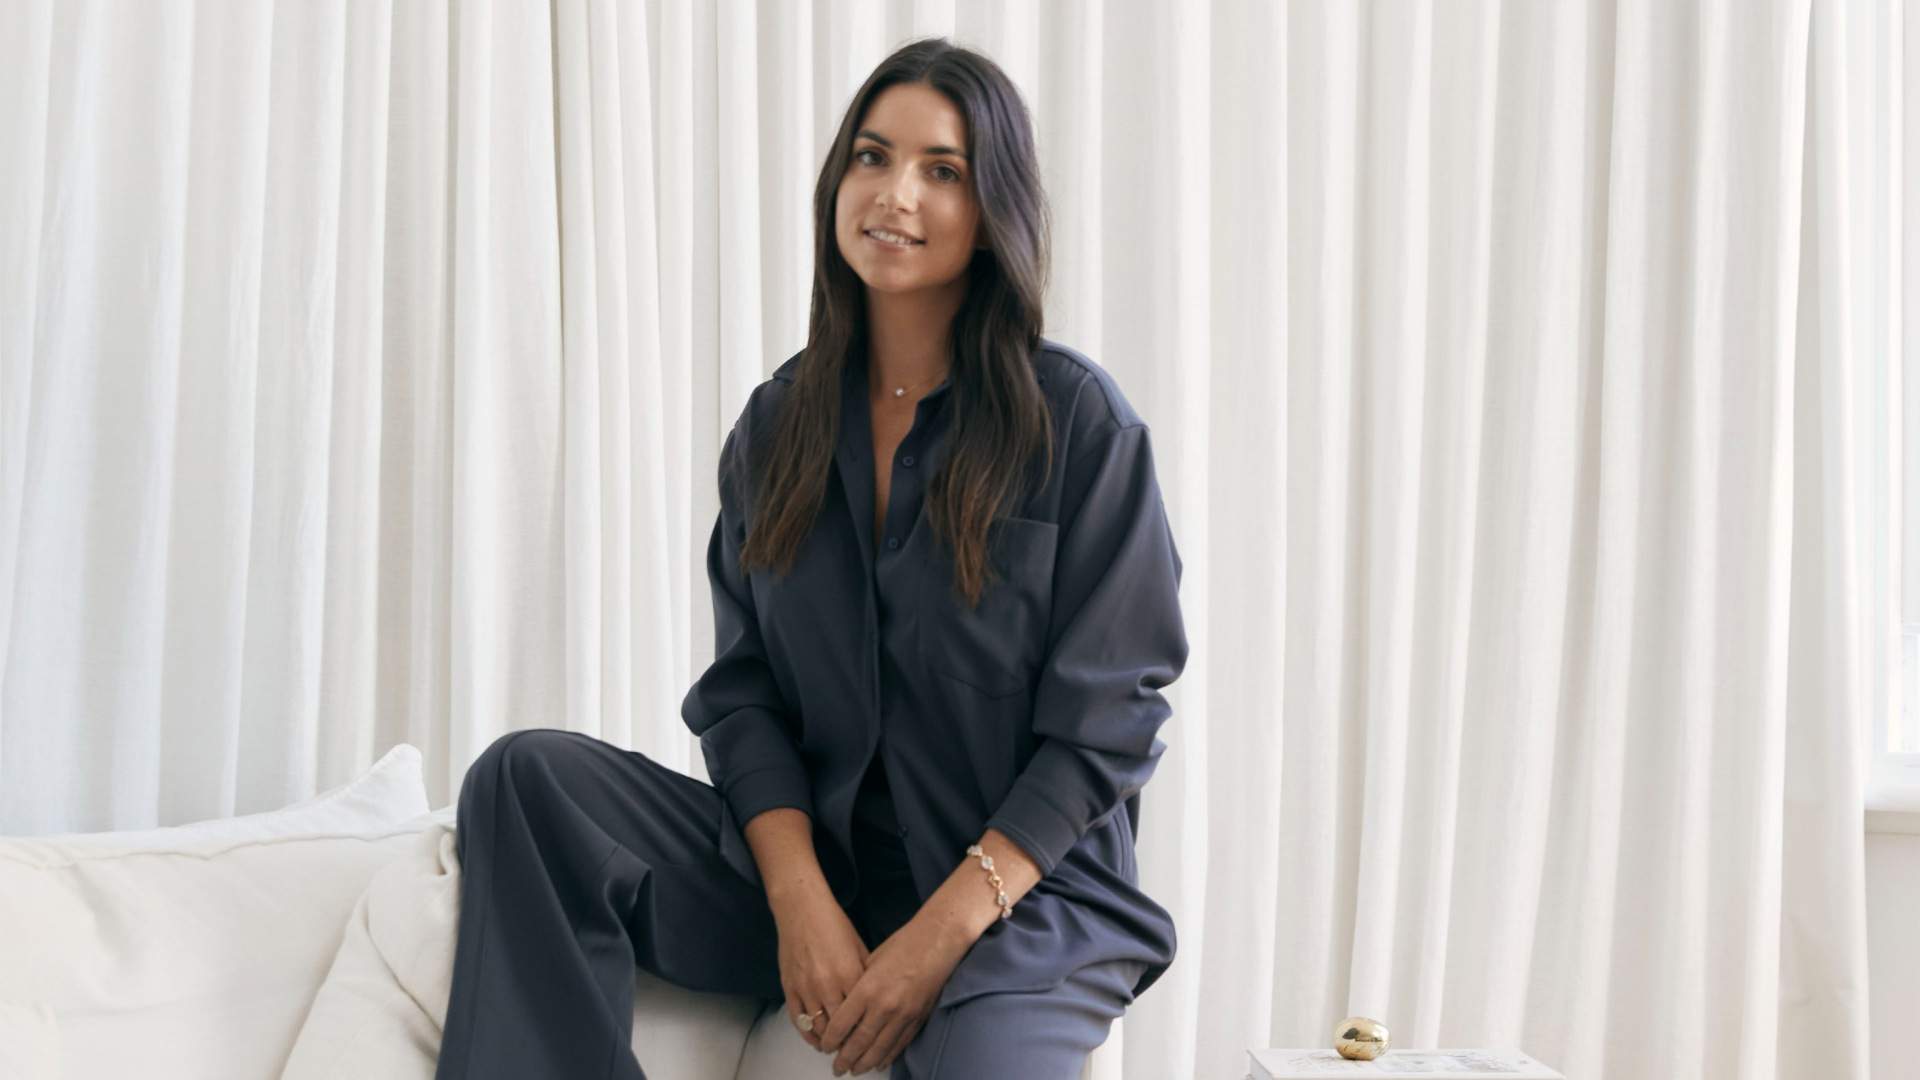 The Guest Edit: The Curve's Victoria Harris Shares Her Go-To Resources for Getting Her Shit Together